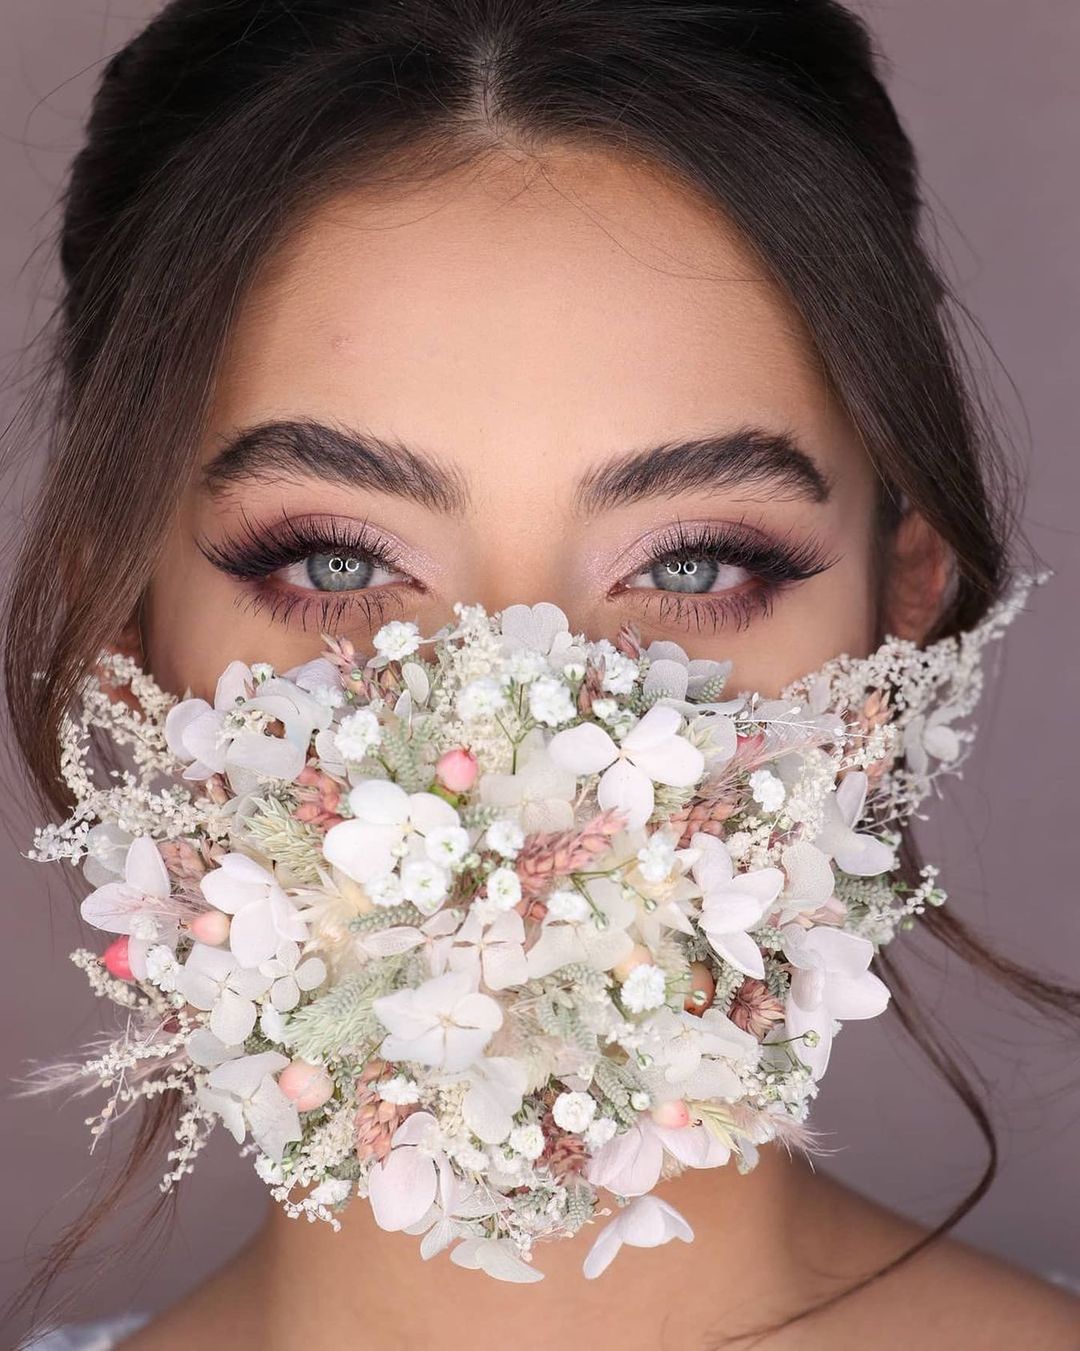 these-floral-face-masks-are-pretty-cool-featured